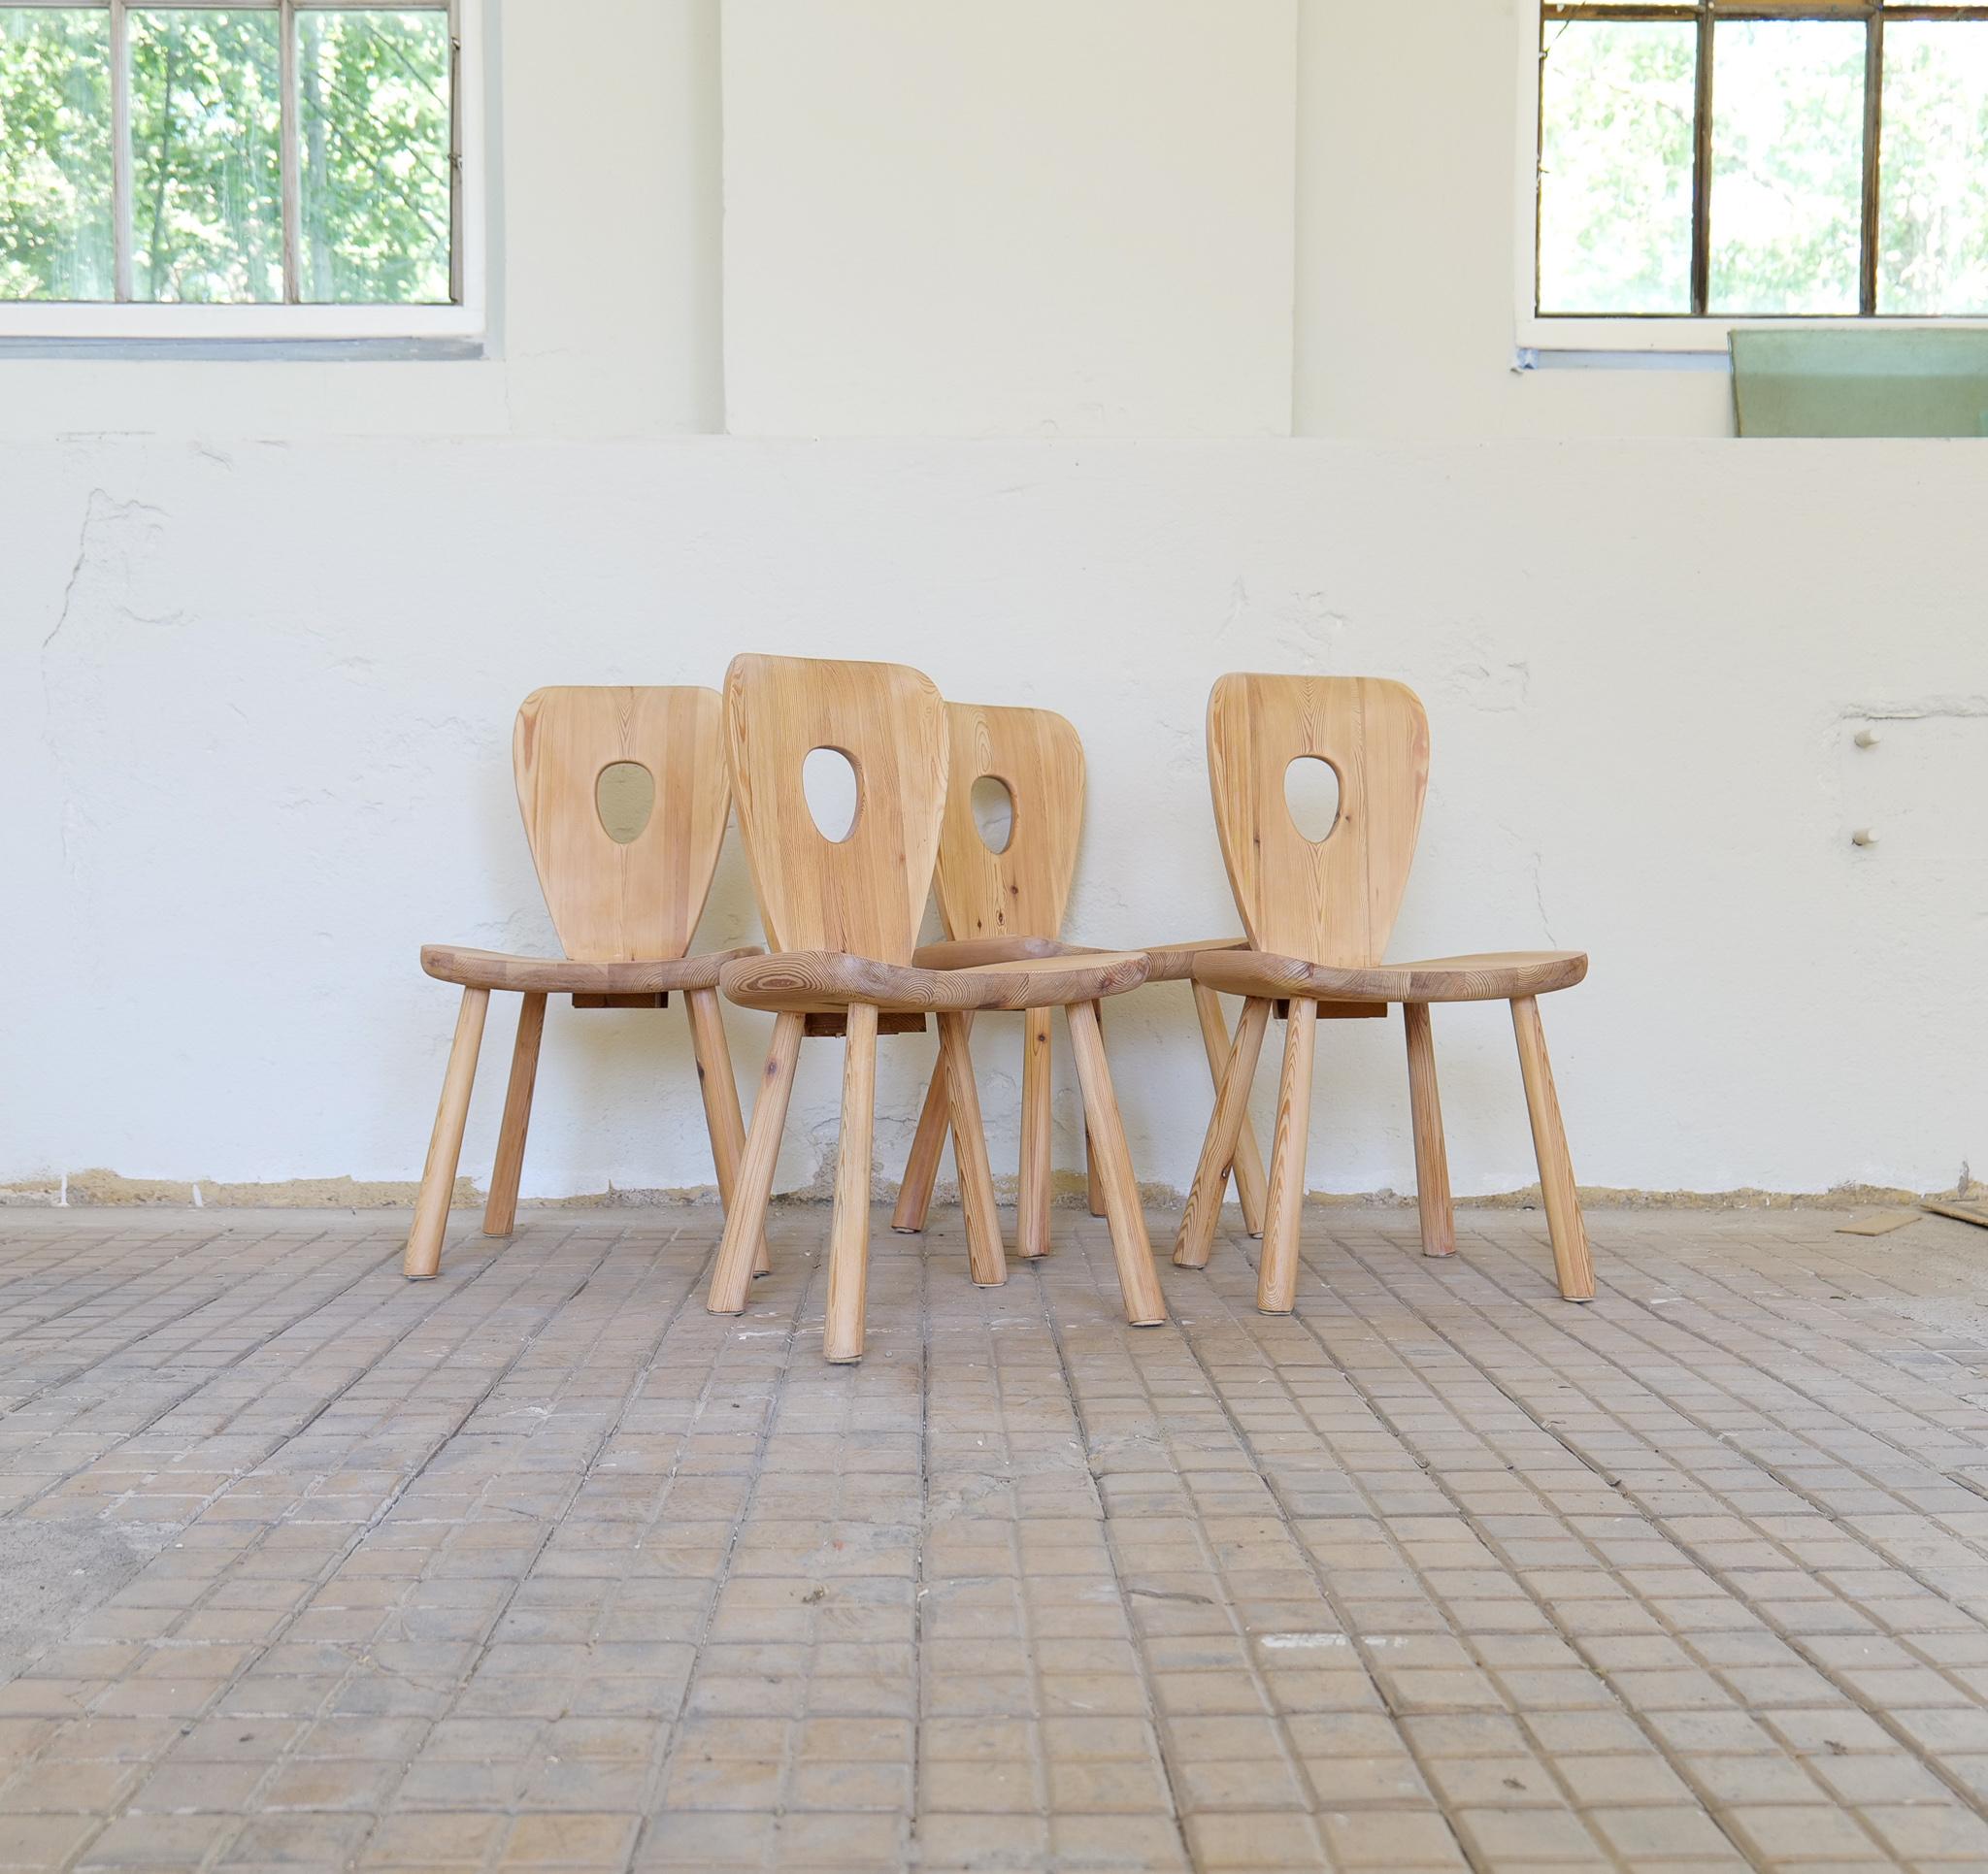 These rare sculptural studio chairs designed by Bo Fjaestad and manufactured in Arvika Sweden during the late 1930s. They were made at Arvika Konsthantverk. 
are a great example of what was called cabin furniture during this time in Sweden. The